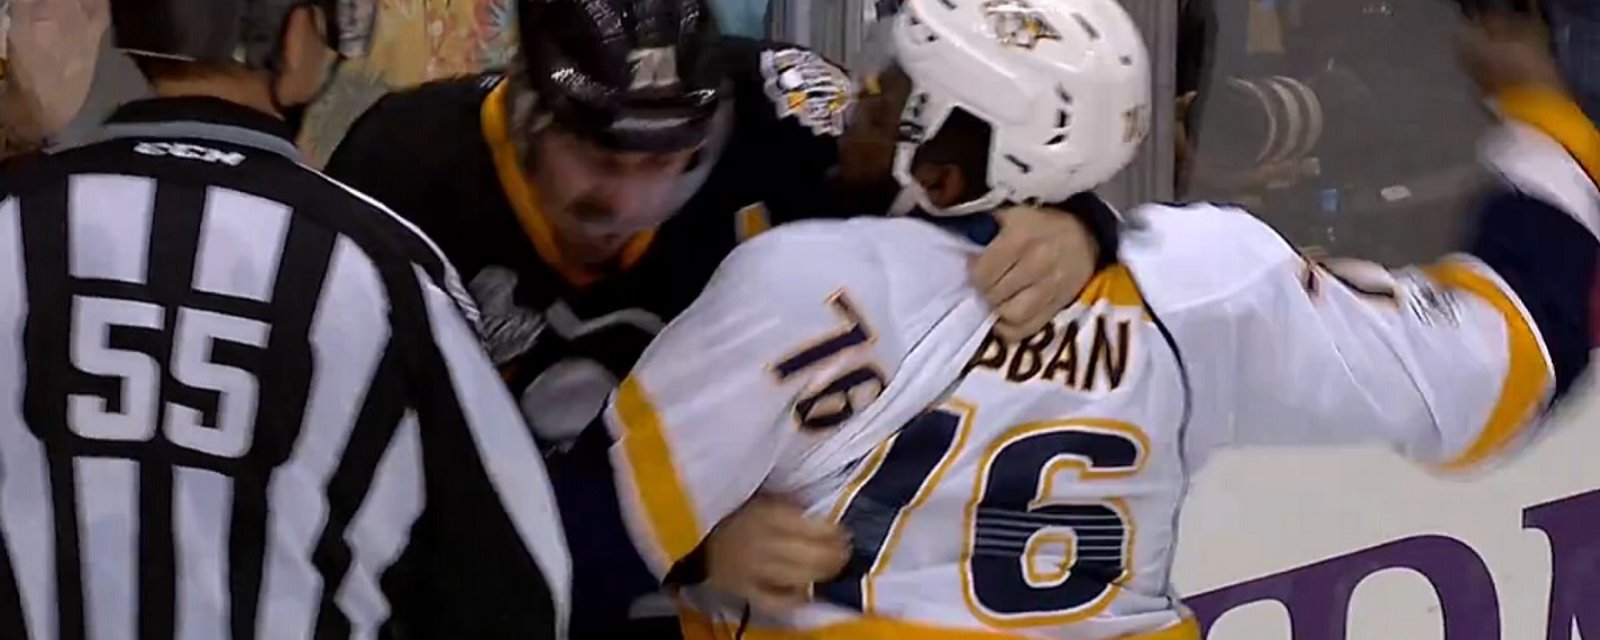 Malkin and Subban drop the gloves in Game 2 of the Cup Final!